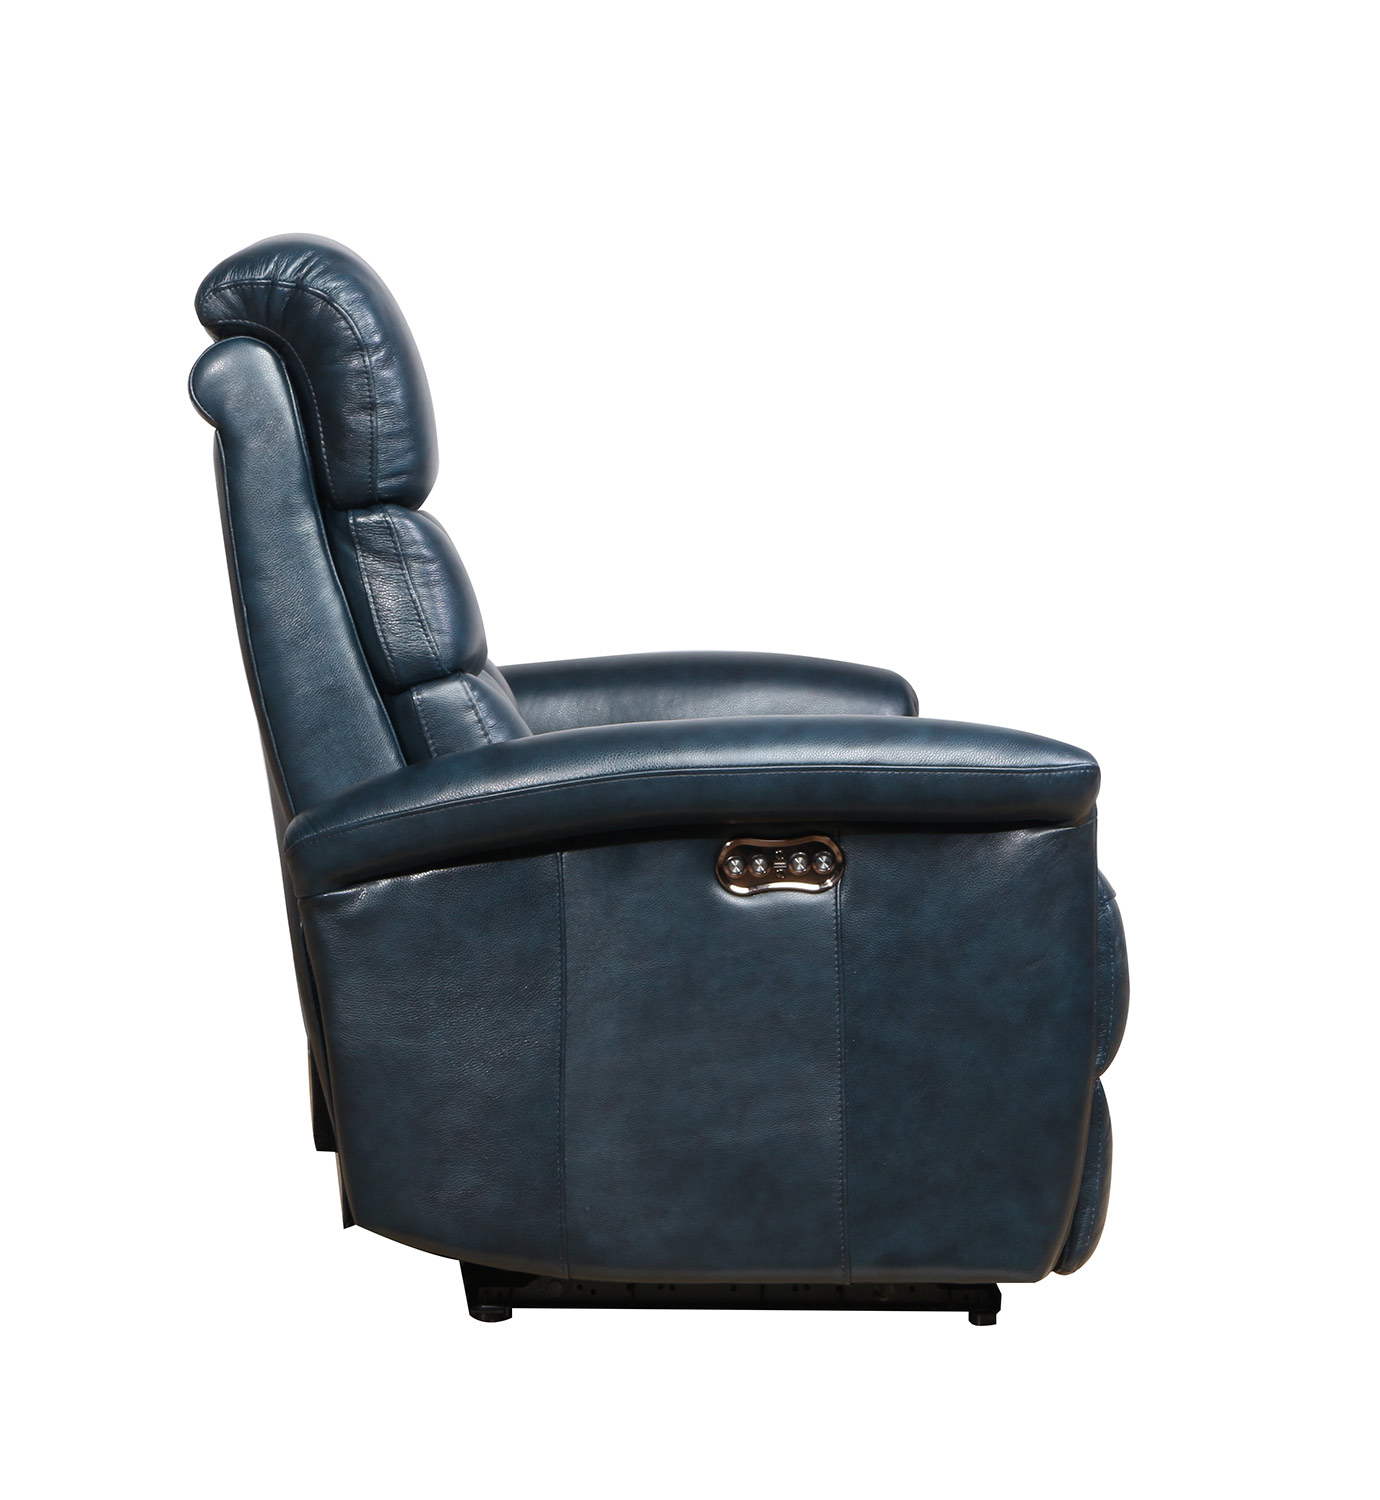 Barcalounger Kelso Power Recliner Chair with Power Head Rest - Ryegate Sapphire Blue/Leather Match